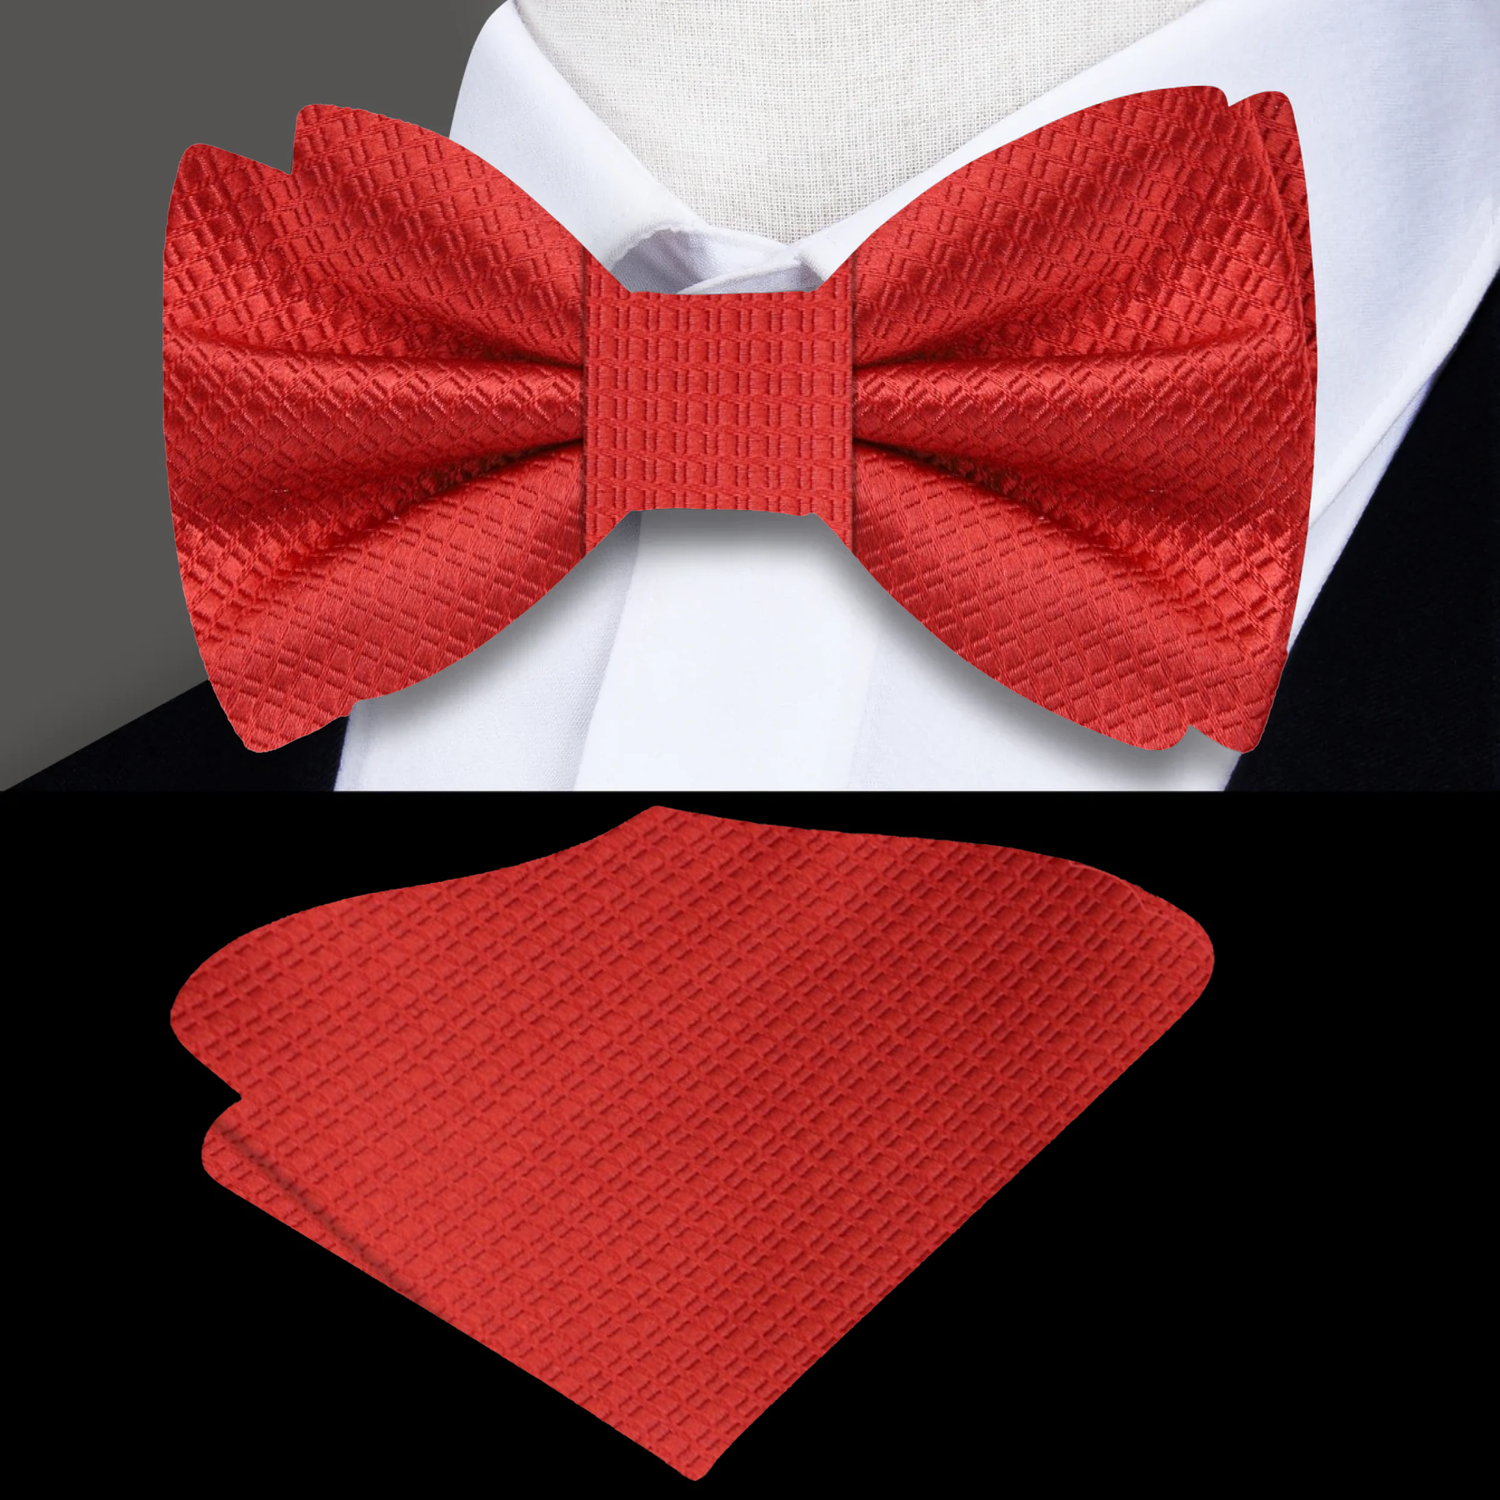 Red Bow Tie with Check Texture, Matching Square